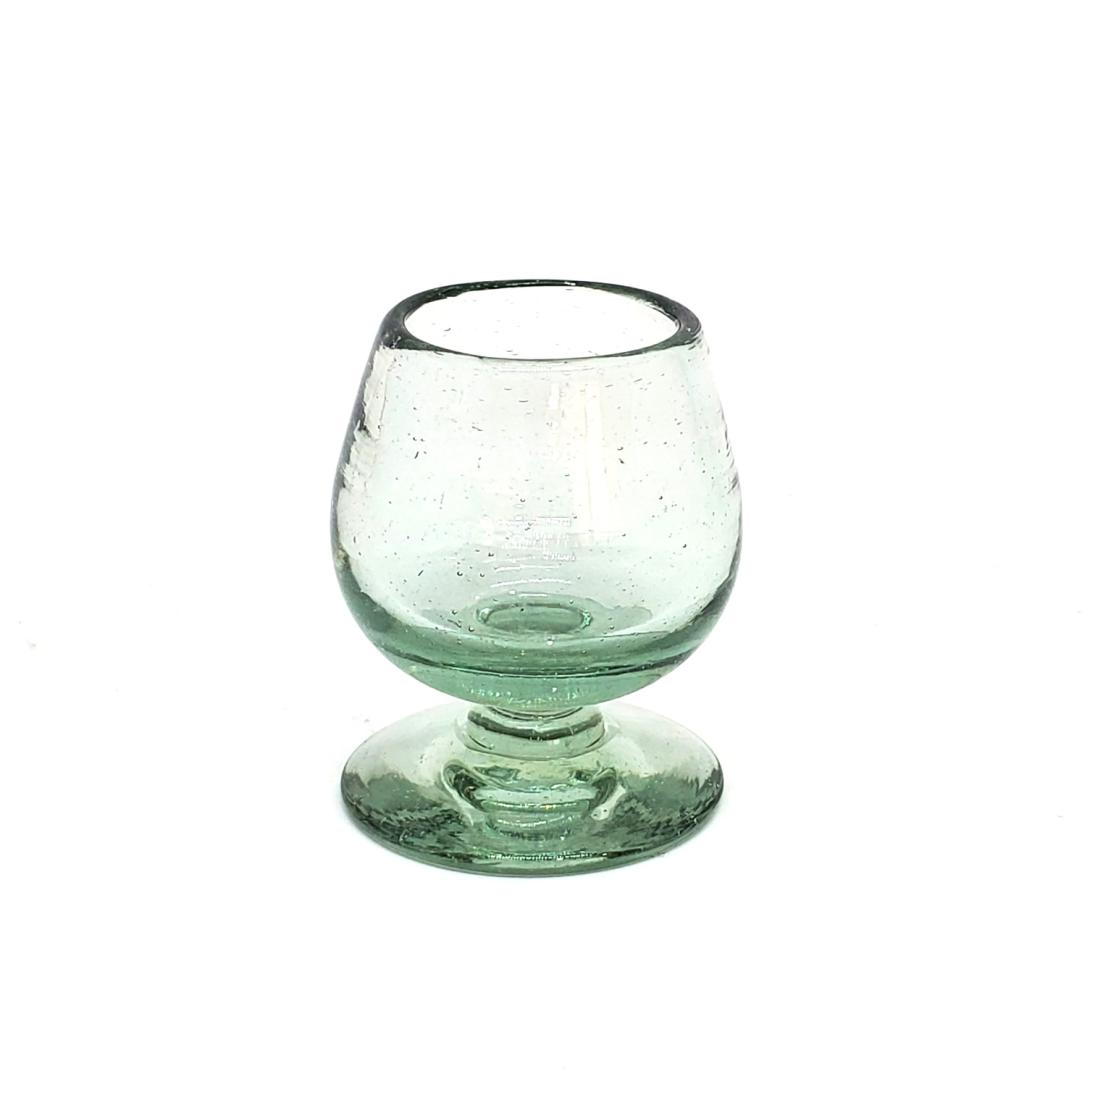 Wholesale MEXICAN GLASSWARE / Clear 2.5 oz Tequila Sippers   / Sip your favourite tequila or mezcal with these iconic clear handcrafted sipping glasses. You may also serve lemon juice or other chasers.